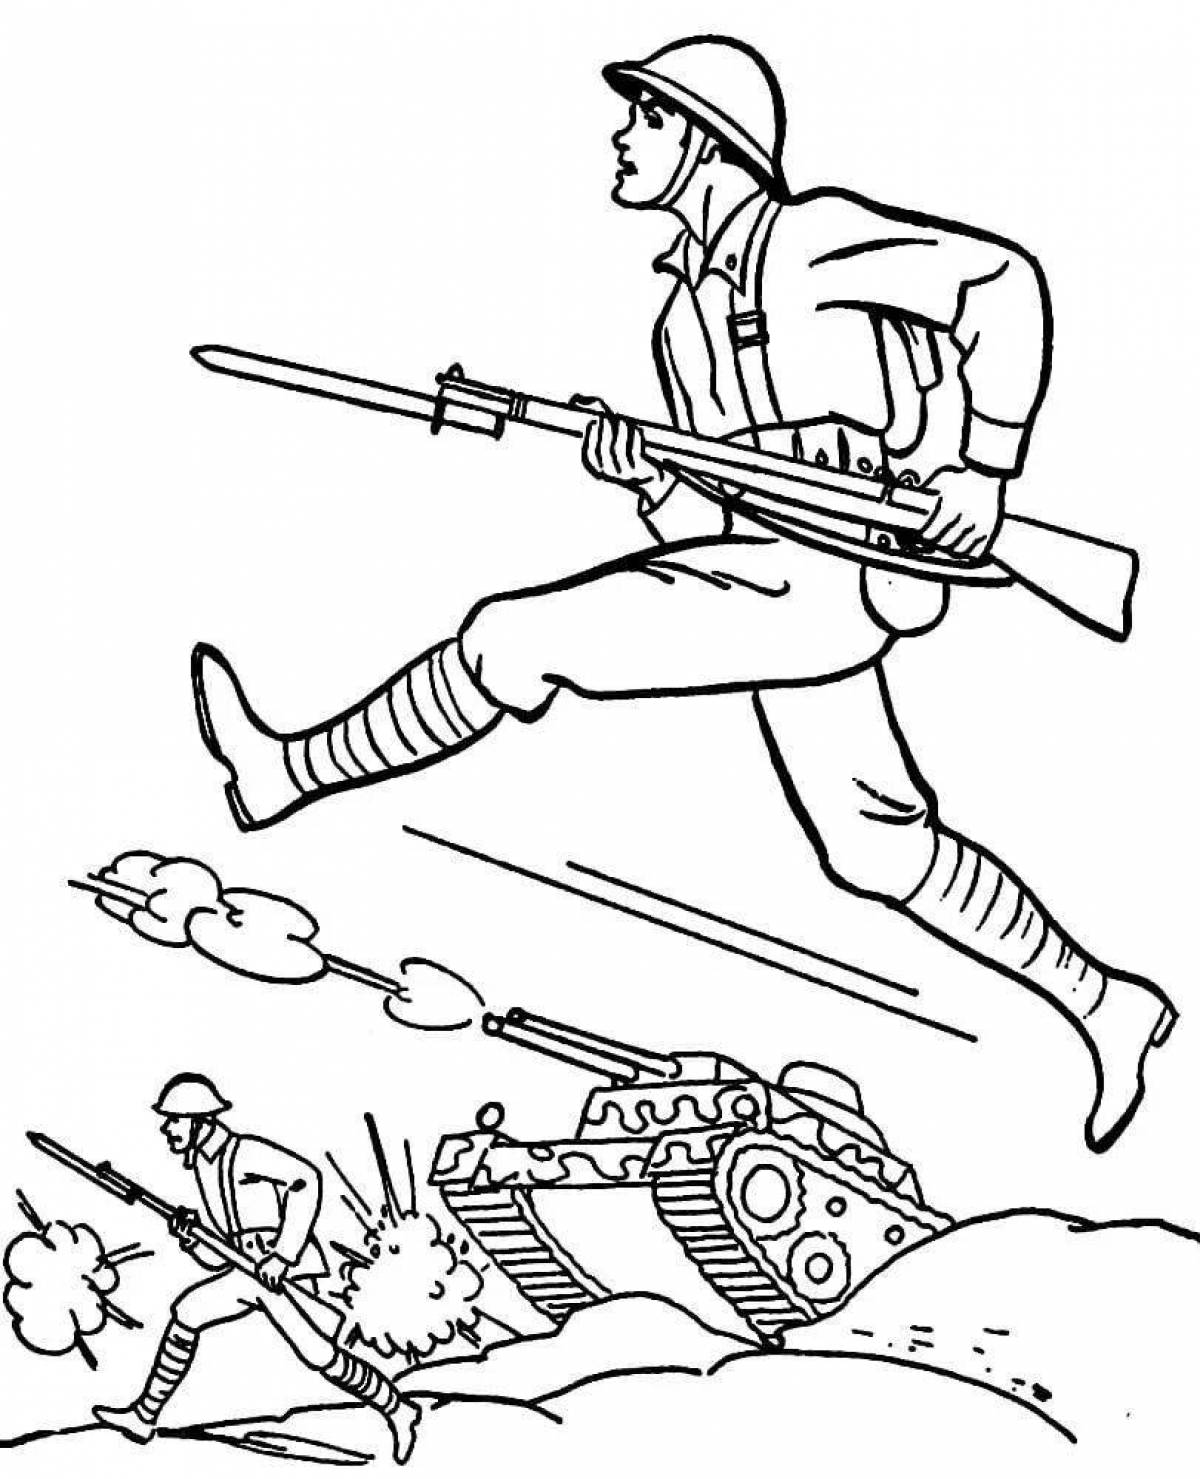 Charming soldier and tank coloring page